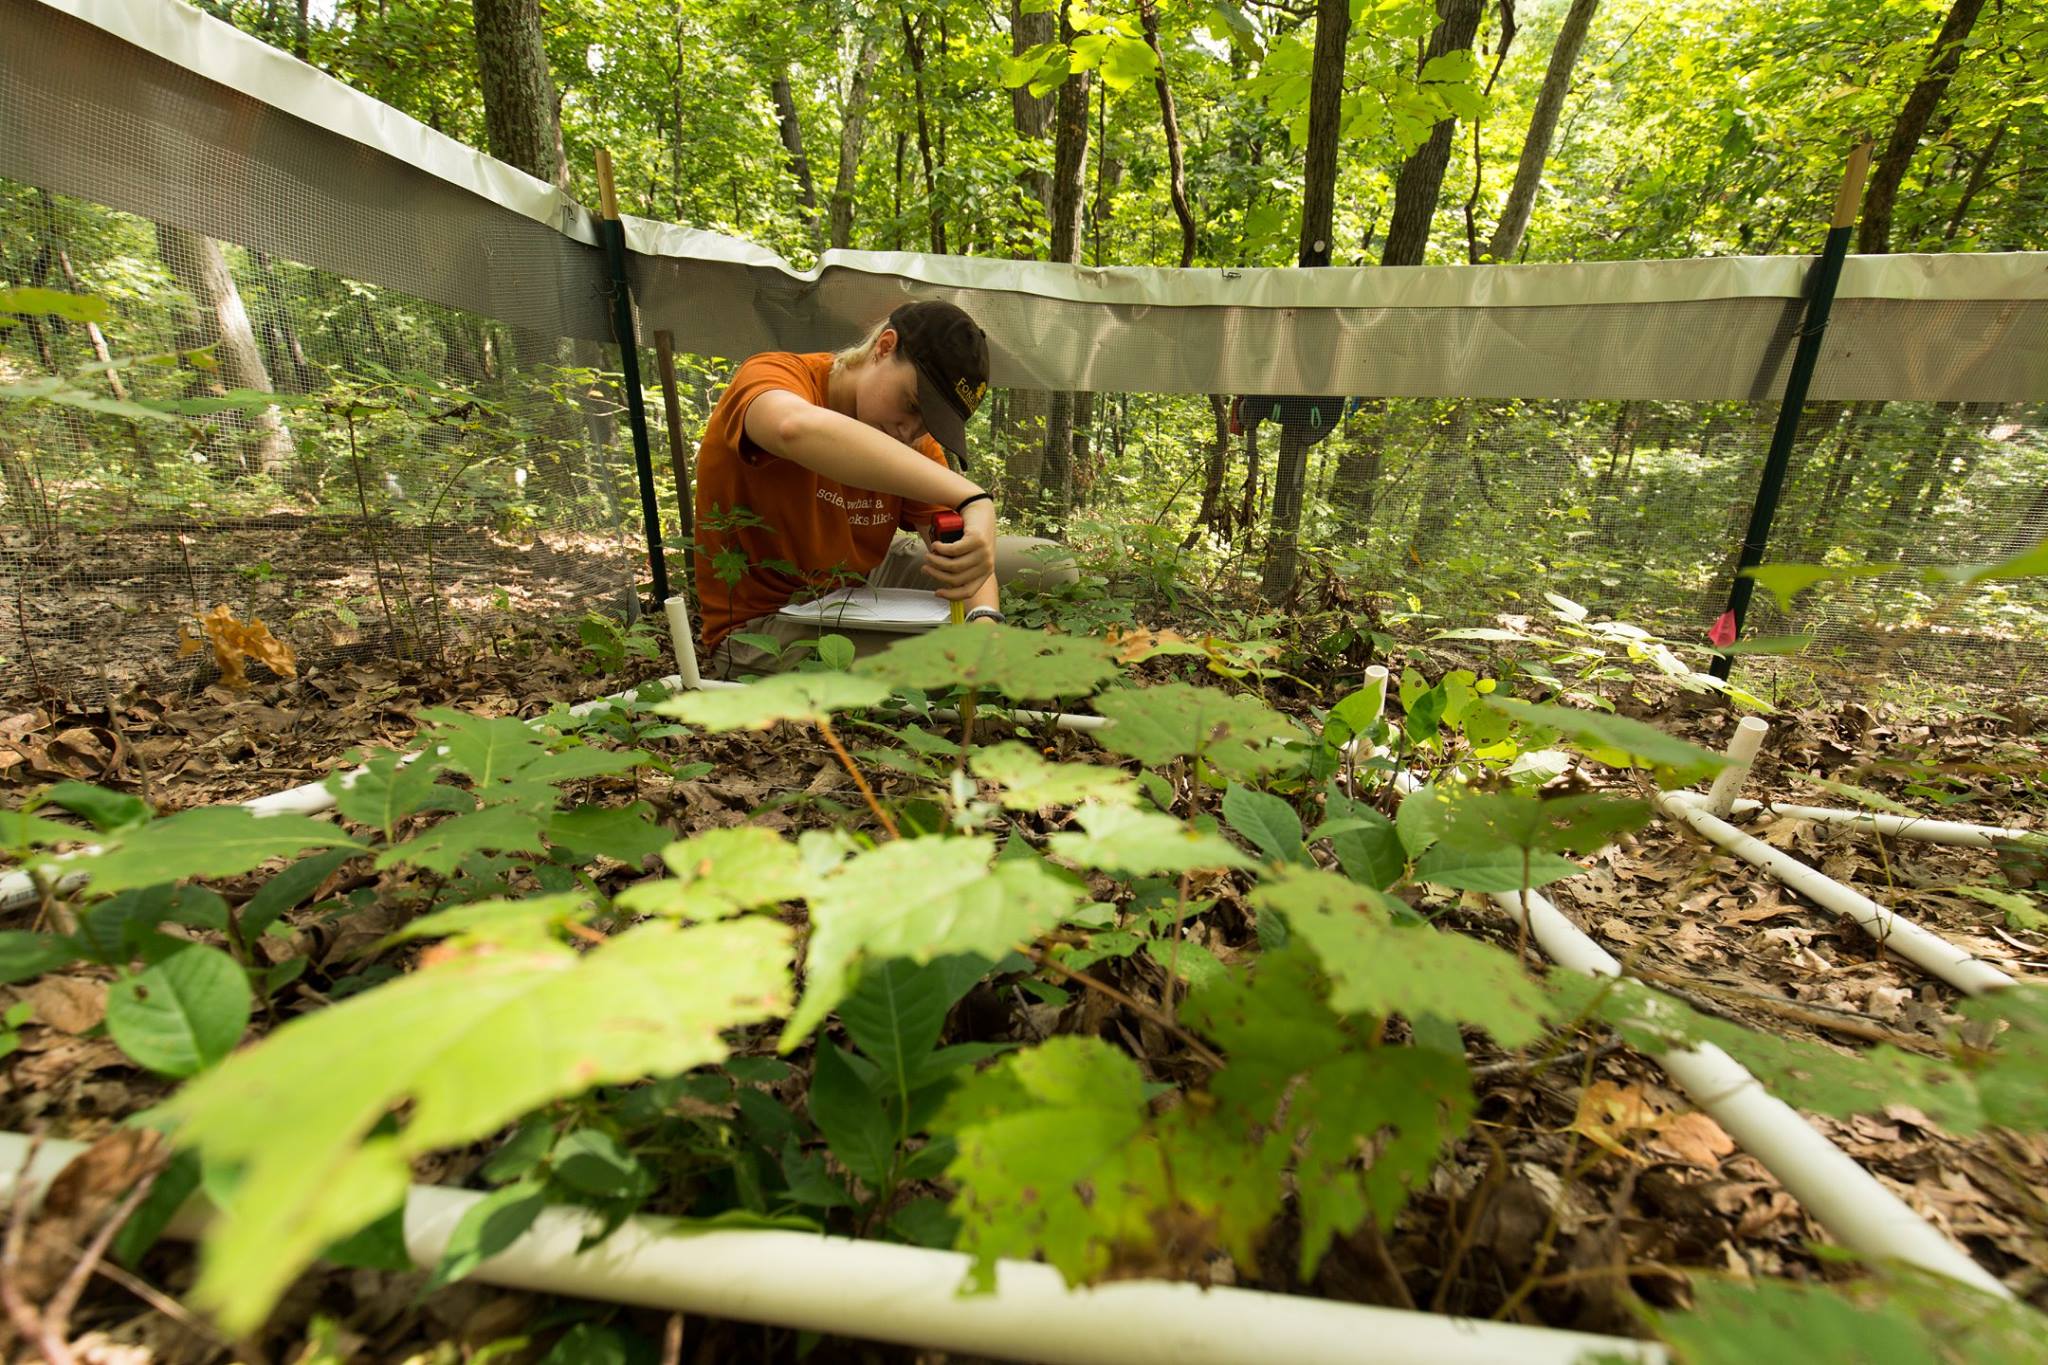   research. education. community.   We are the environmental field station of Washington University in St. Louis. 